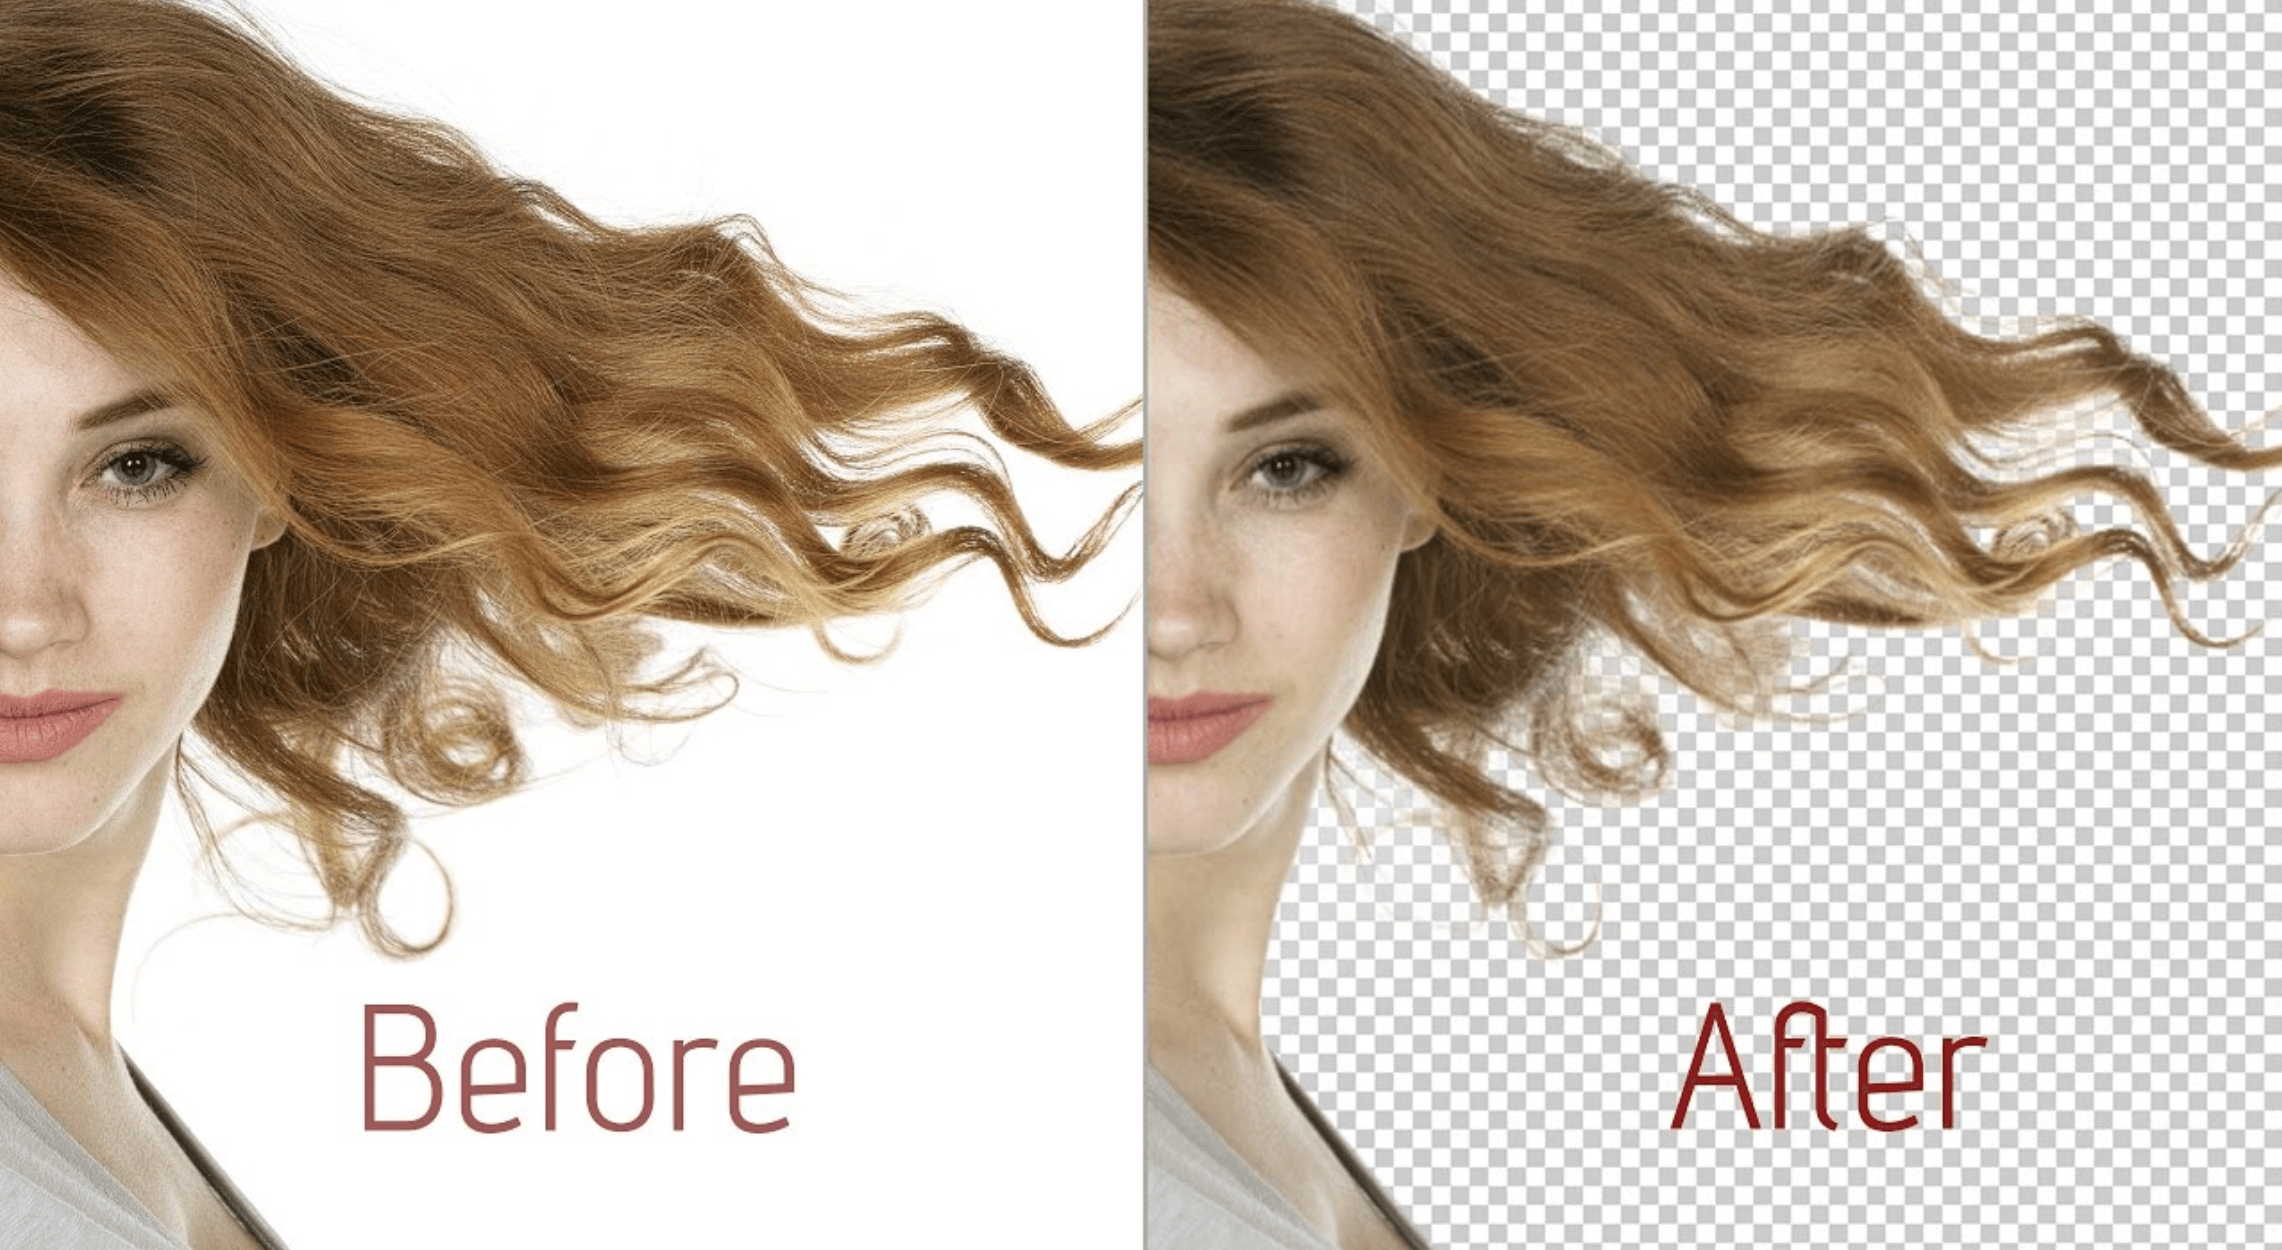 Remove white background from Hair | Clipping Path Source